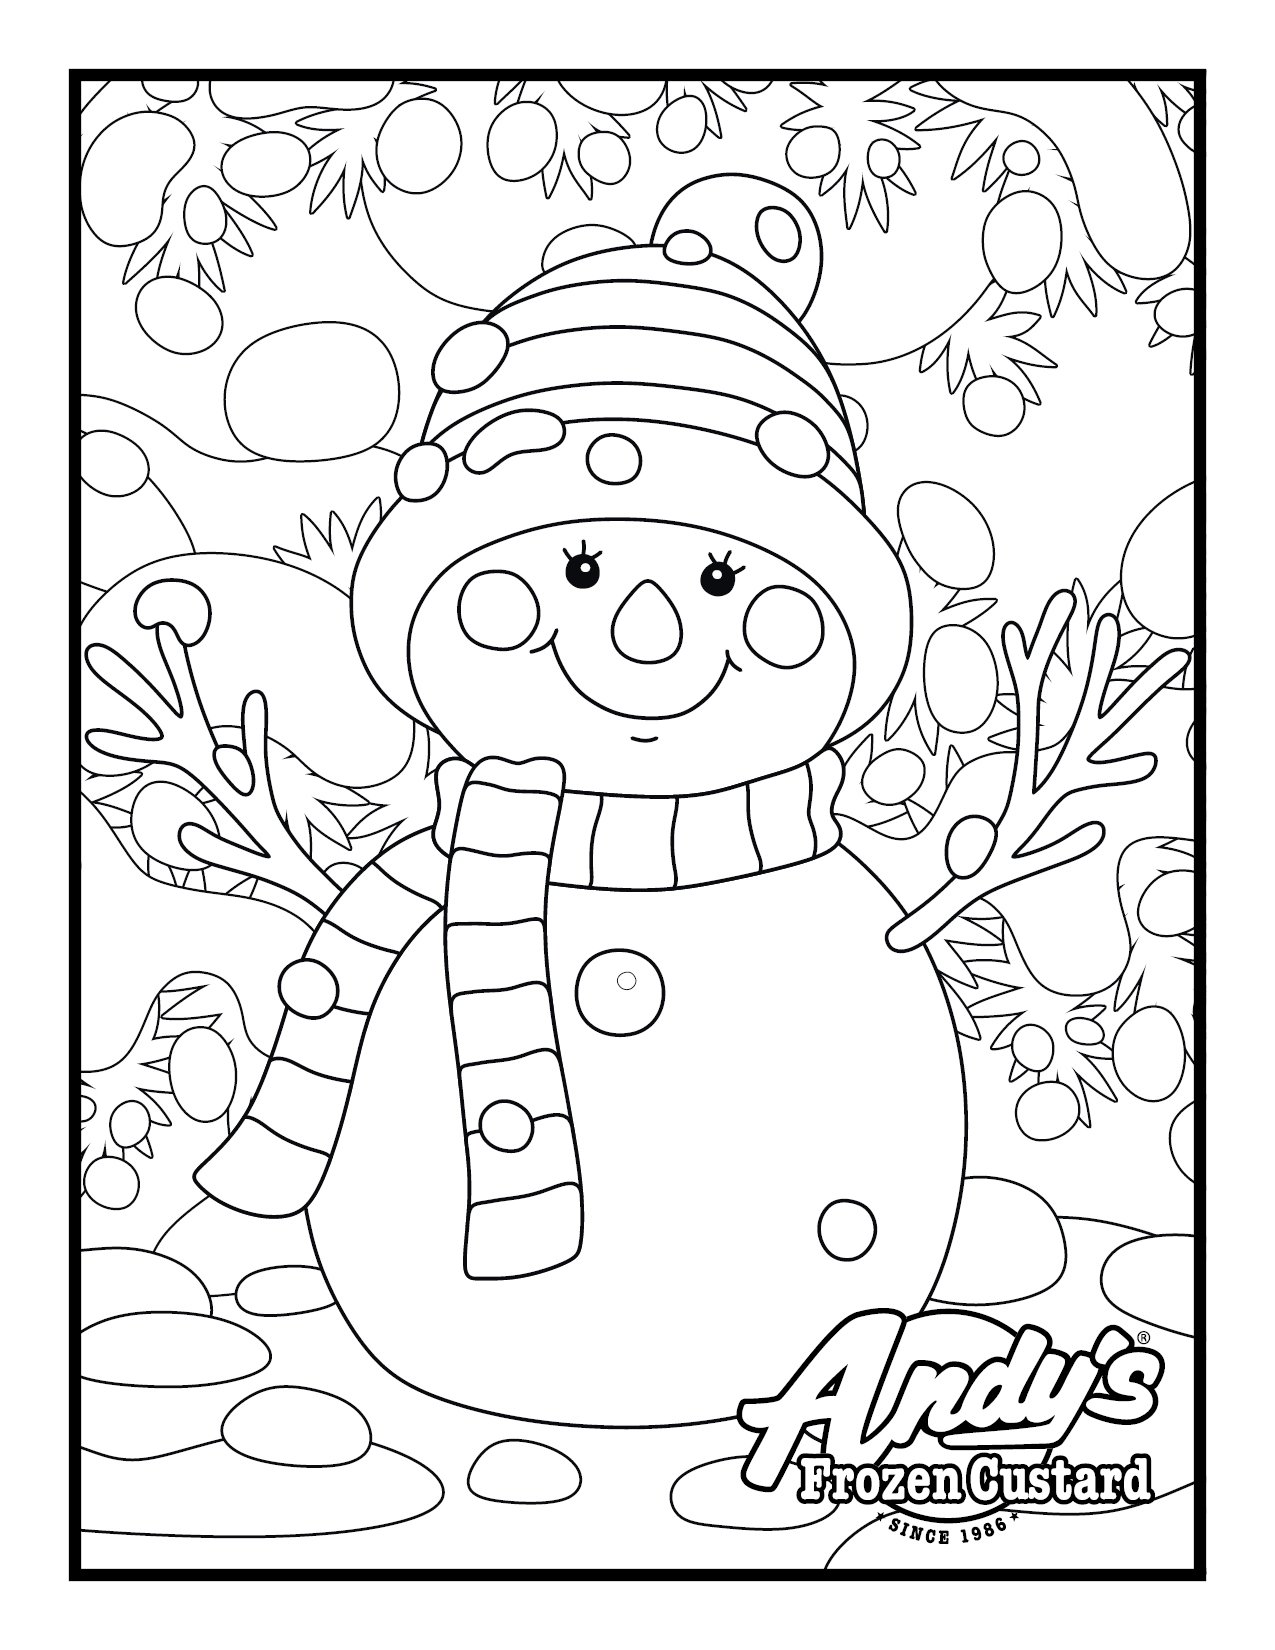 Christmas-Coloring-Page-Snowman.jpg